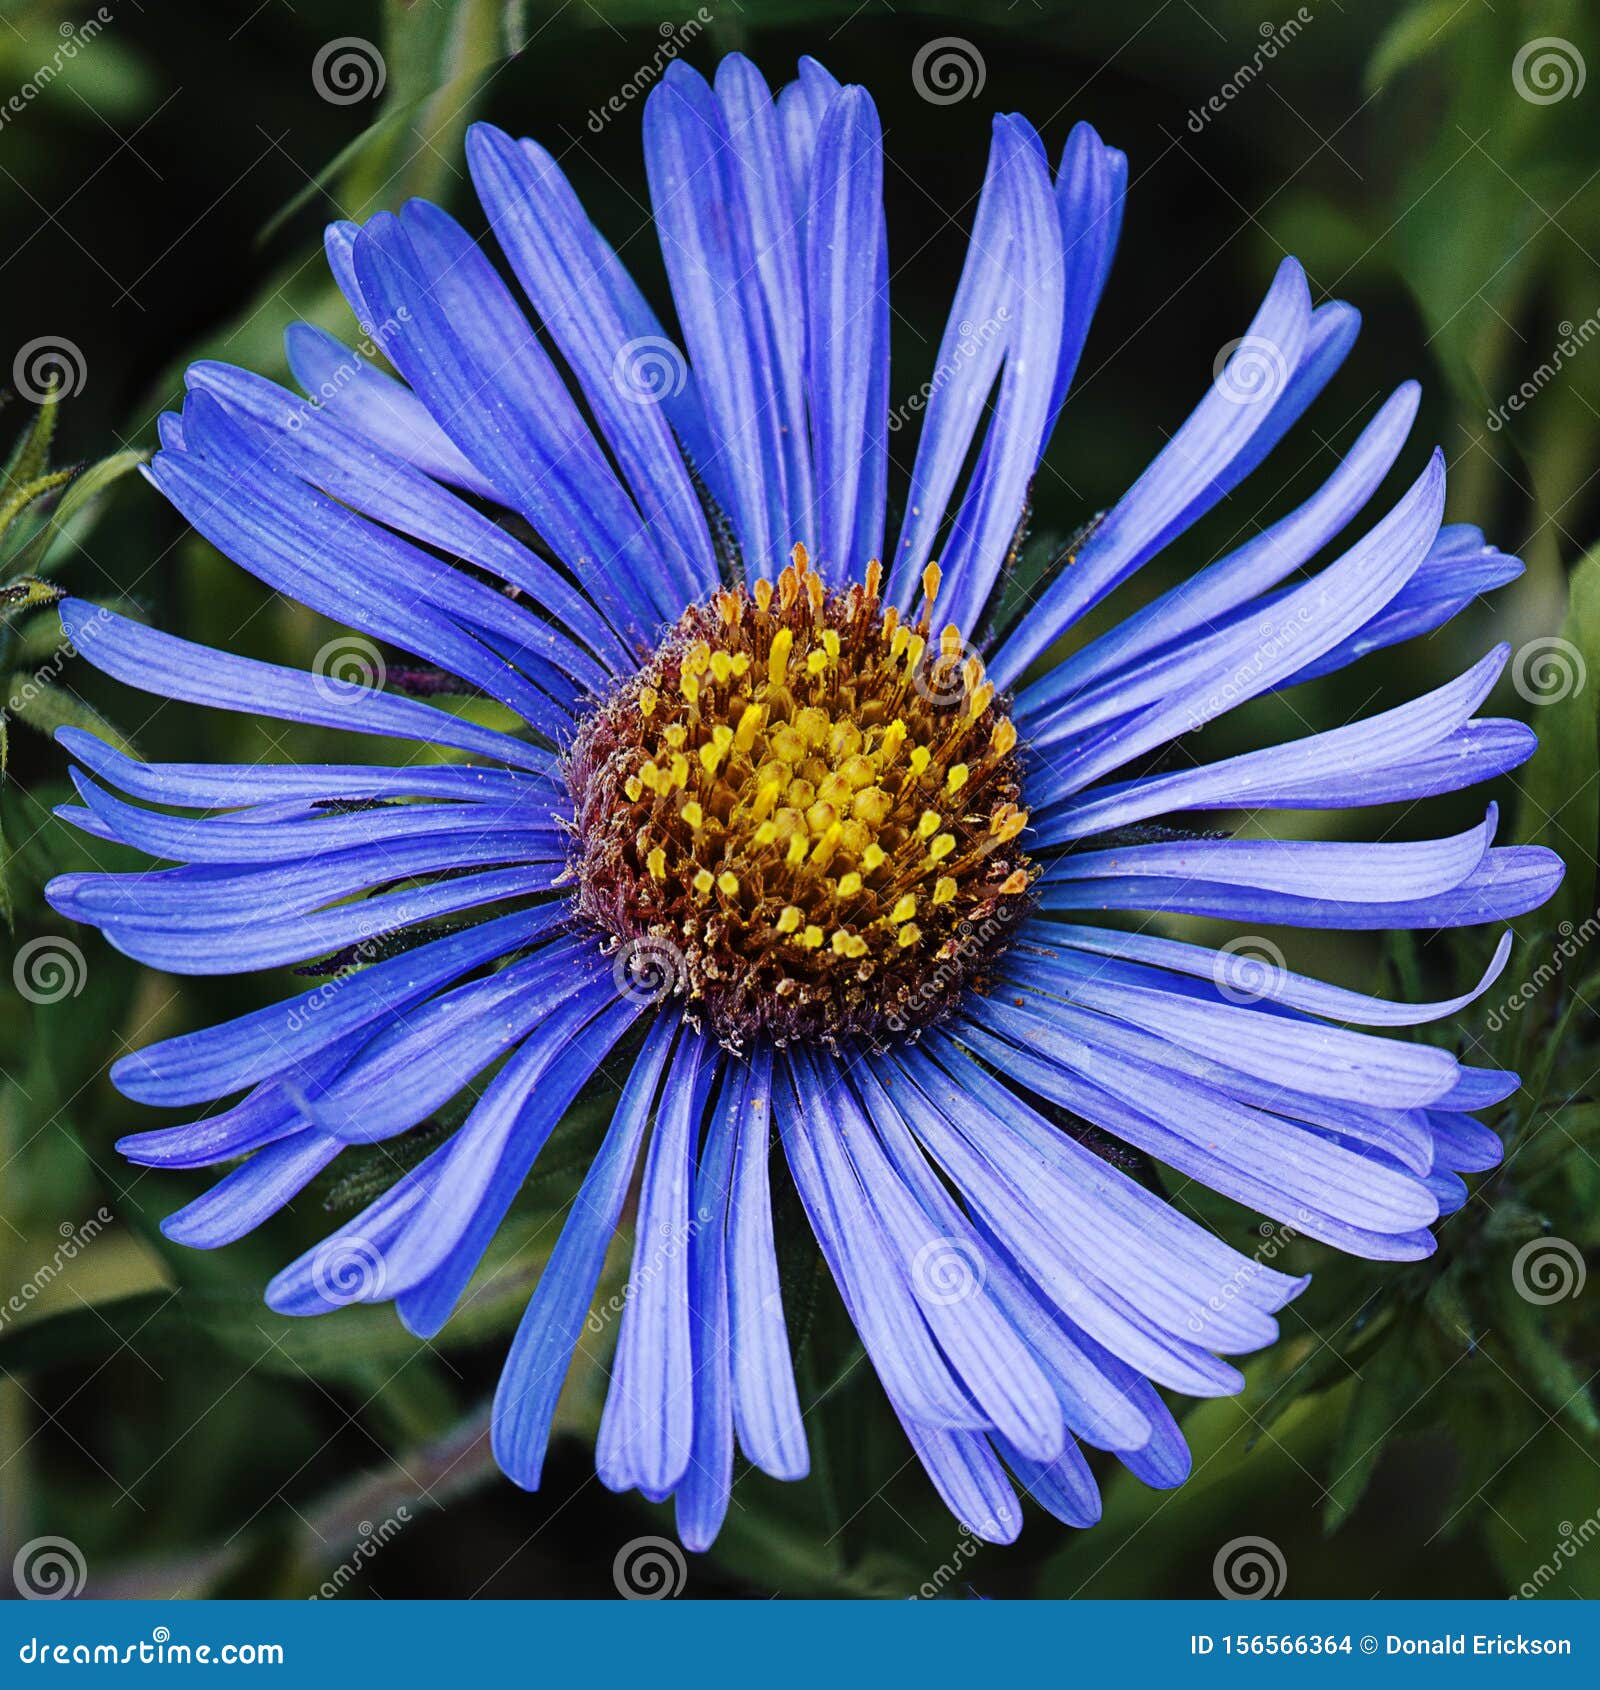 Blue Aster Flower Head On Black Background Stock Photo Image Of Aster Plants 156566364